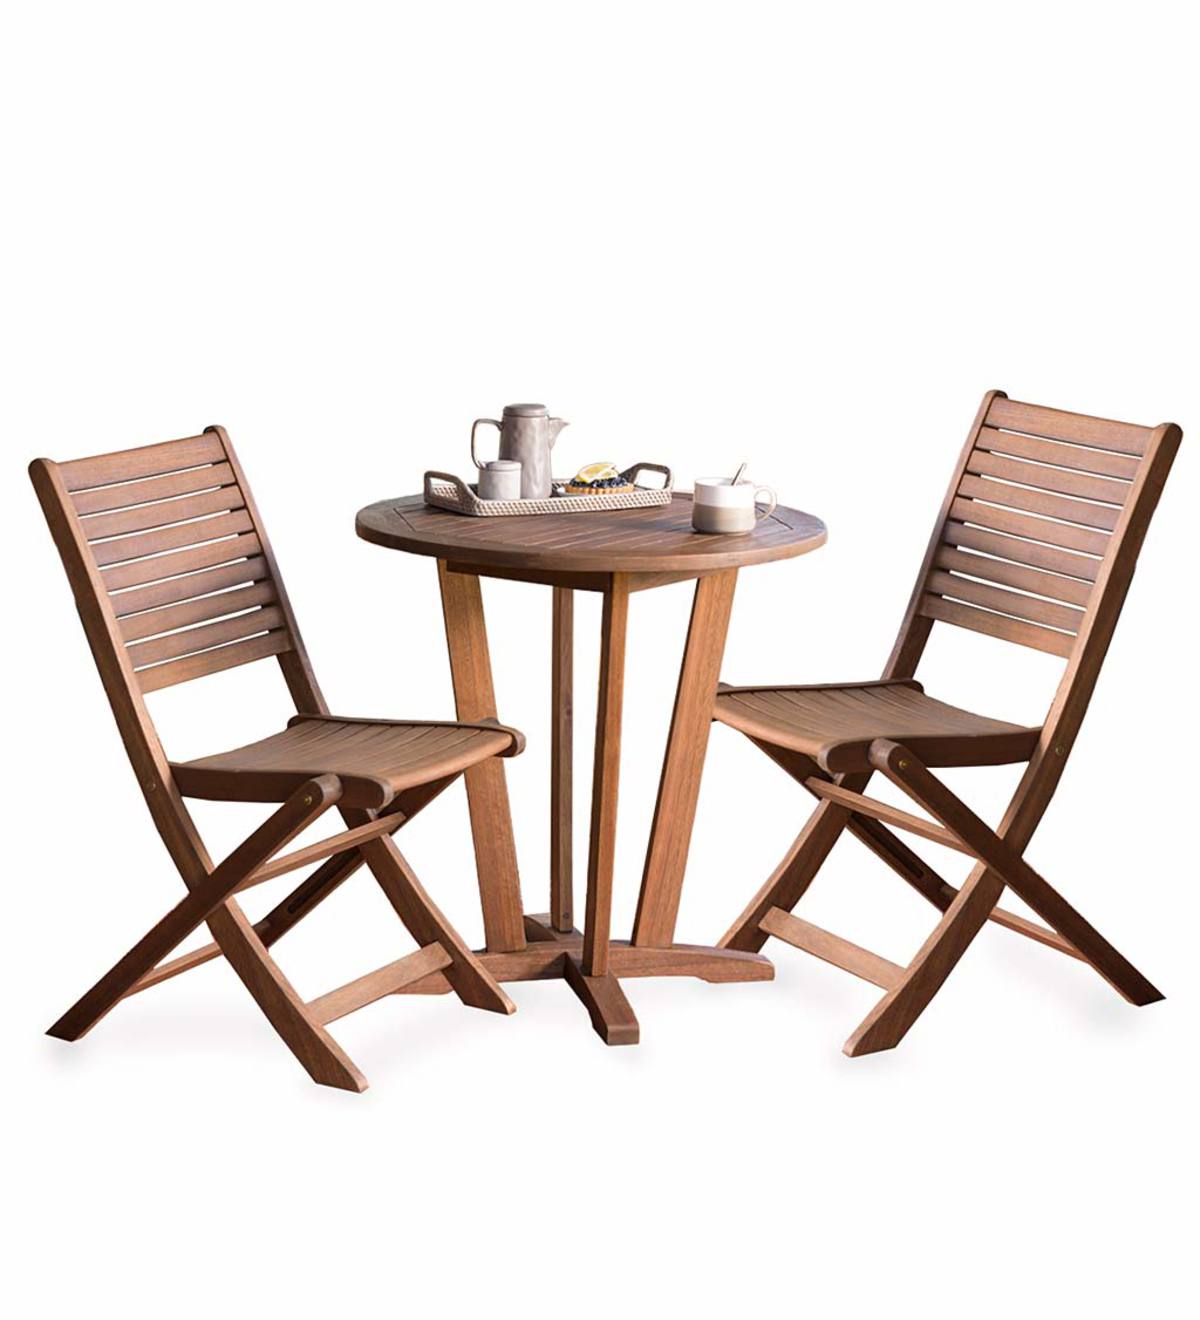 Eucalyptus Bistro Set, Table and Two Chairs